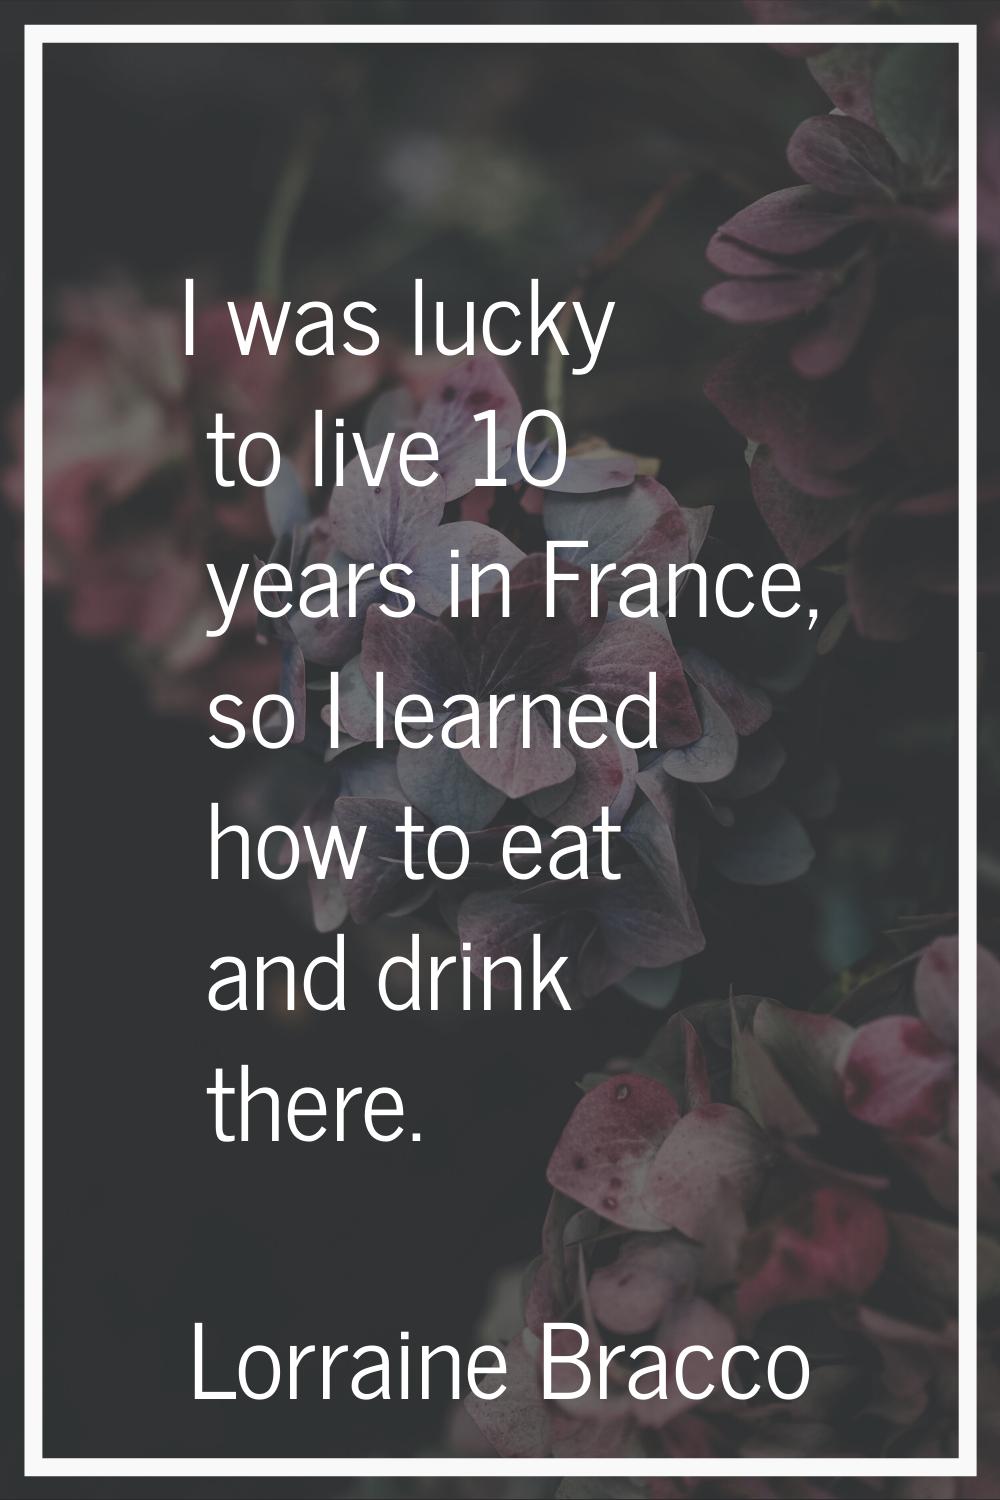 I was lucky to live 10 years in France, so I learned how to eat and drink there.